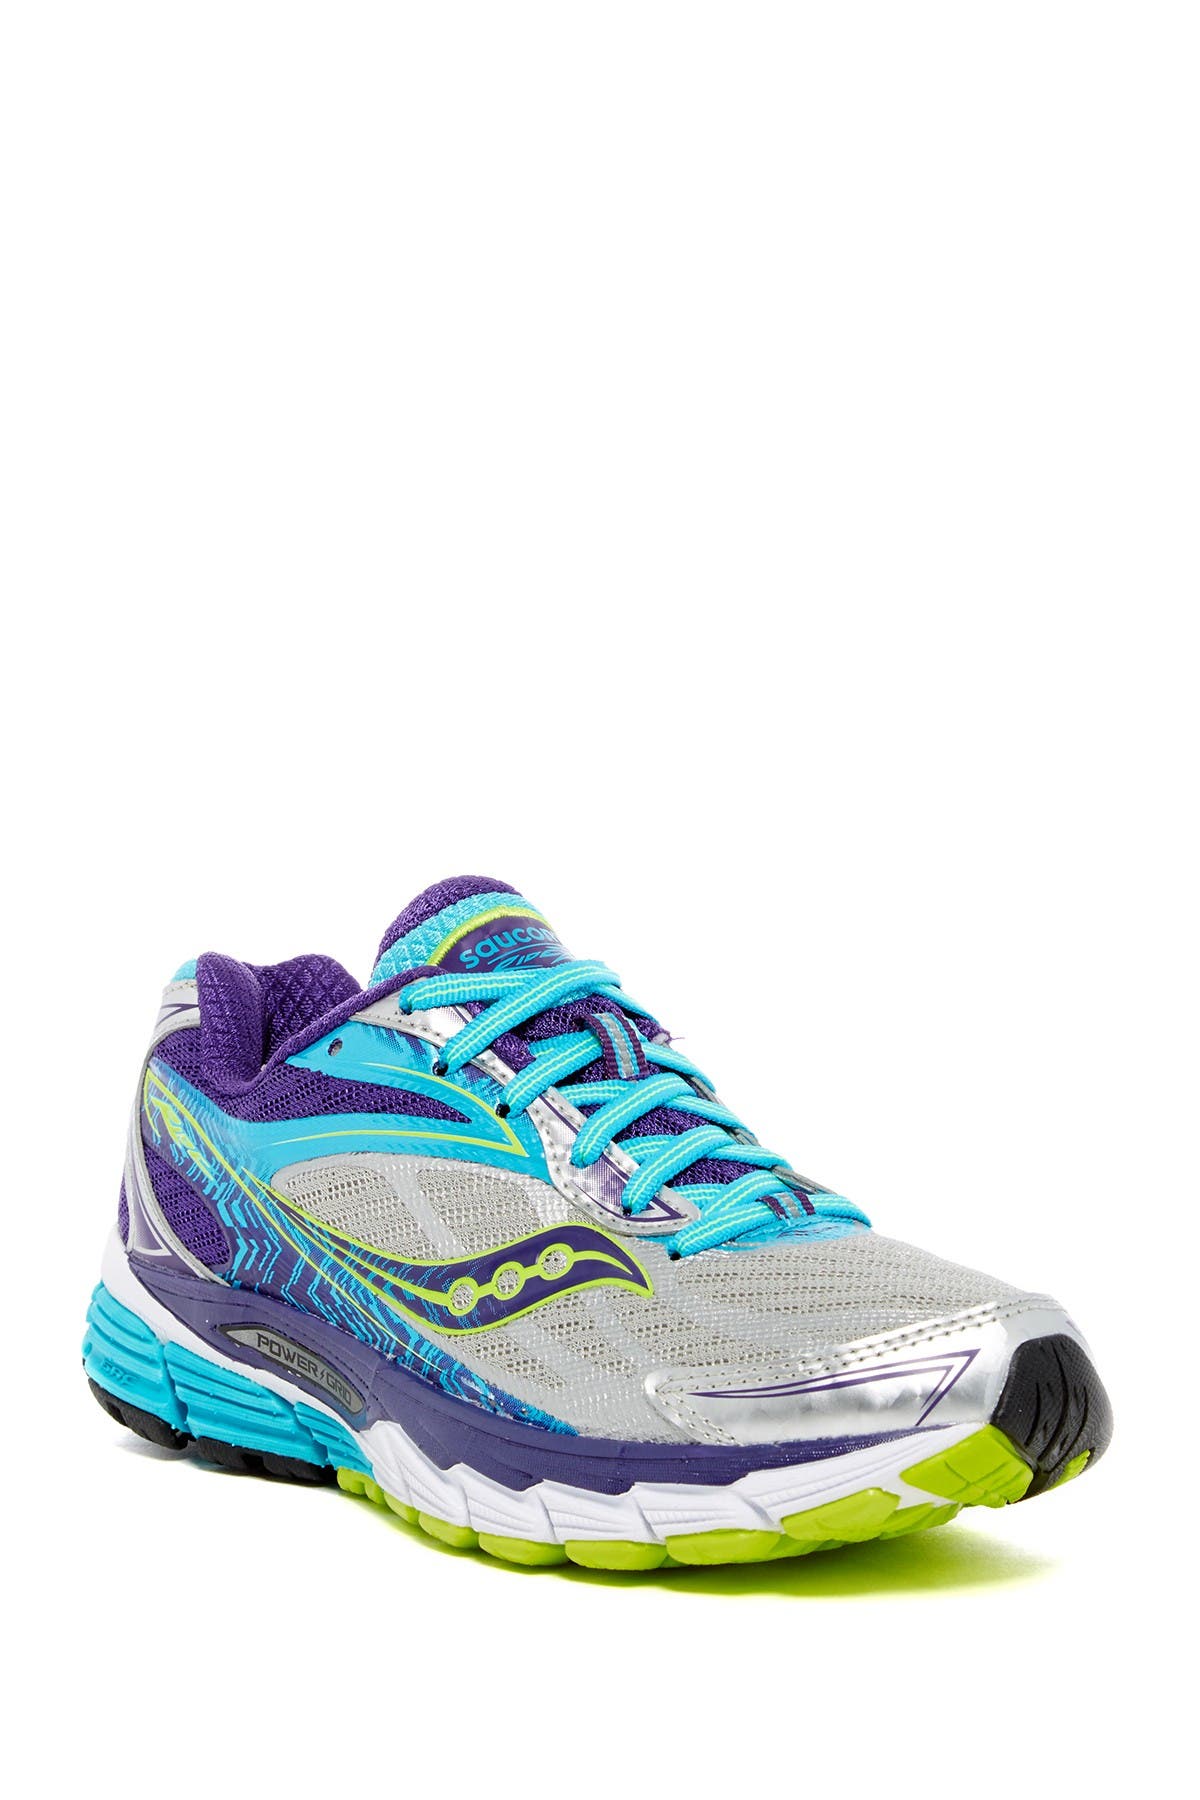 saucony ride 1 womens size 8.5